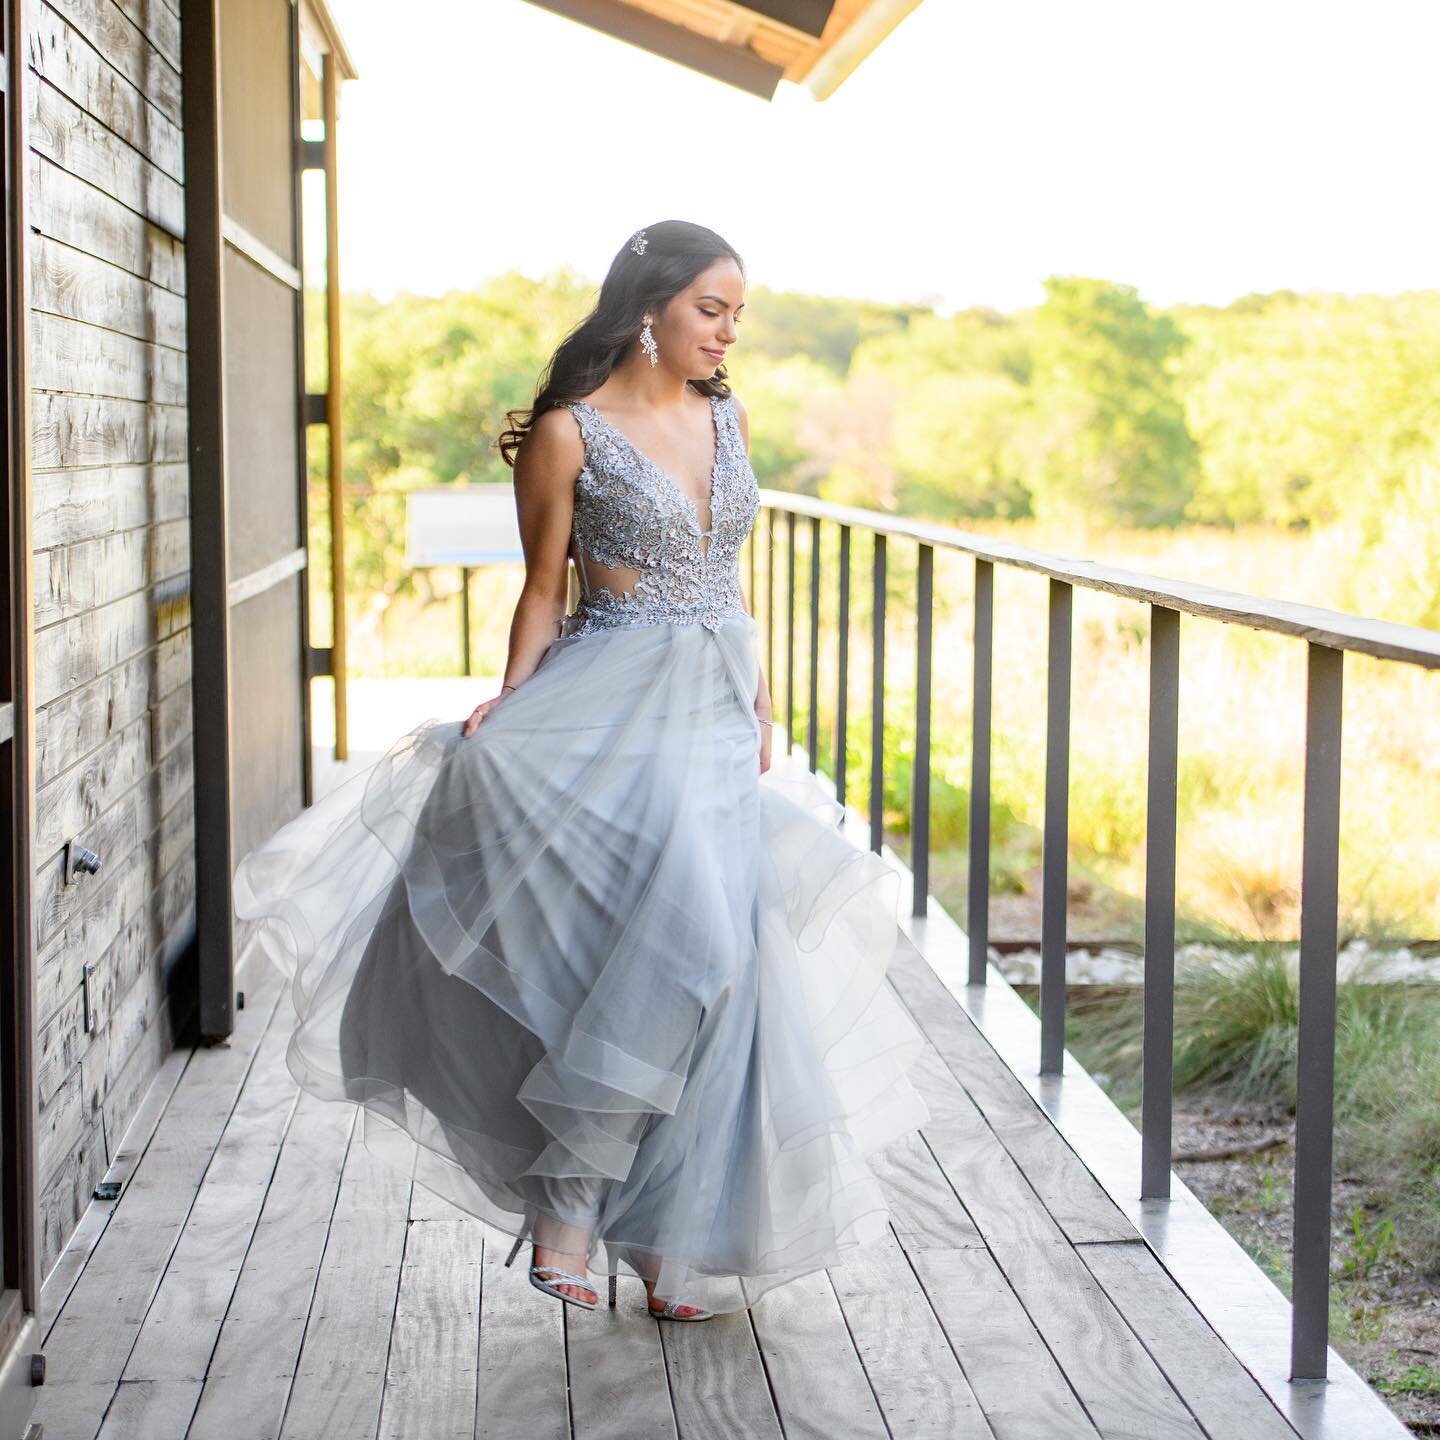 Another 2020 senior photoshoot. 2020 graduates couldn&rsquo;t have prom but it doesn&rsquo;t mean we can&rsquo;t still use the dress. Read more in the blog in our website! 
&bull;
&bull;
&bull;
&bull;
&bull;
#prom2020 #seniorphotos #SAsenior #highsch